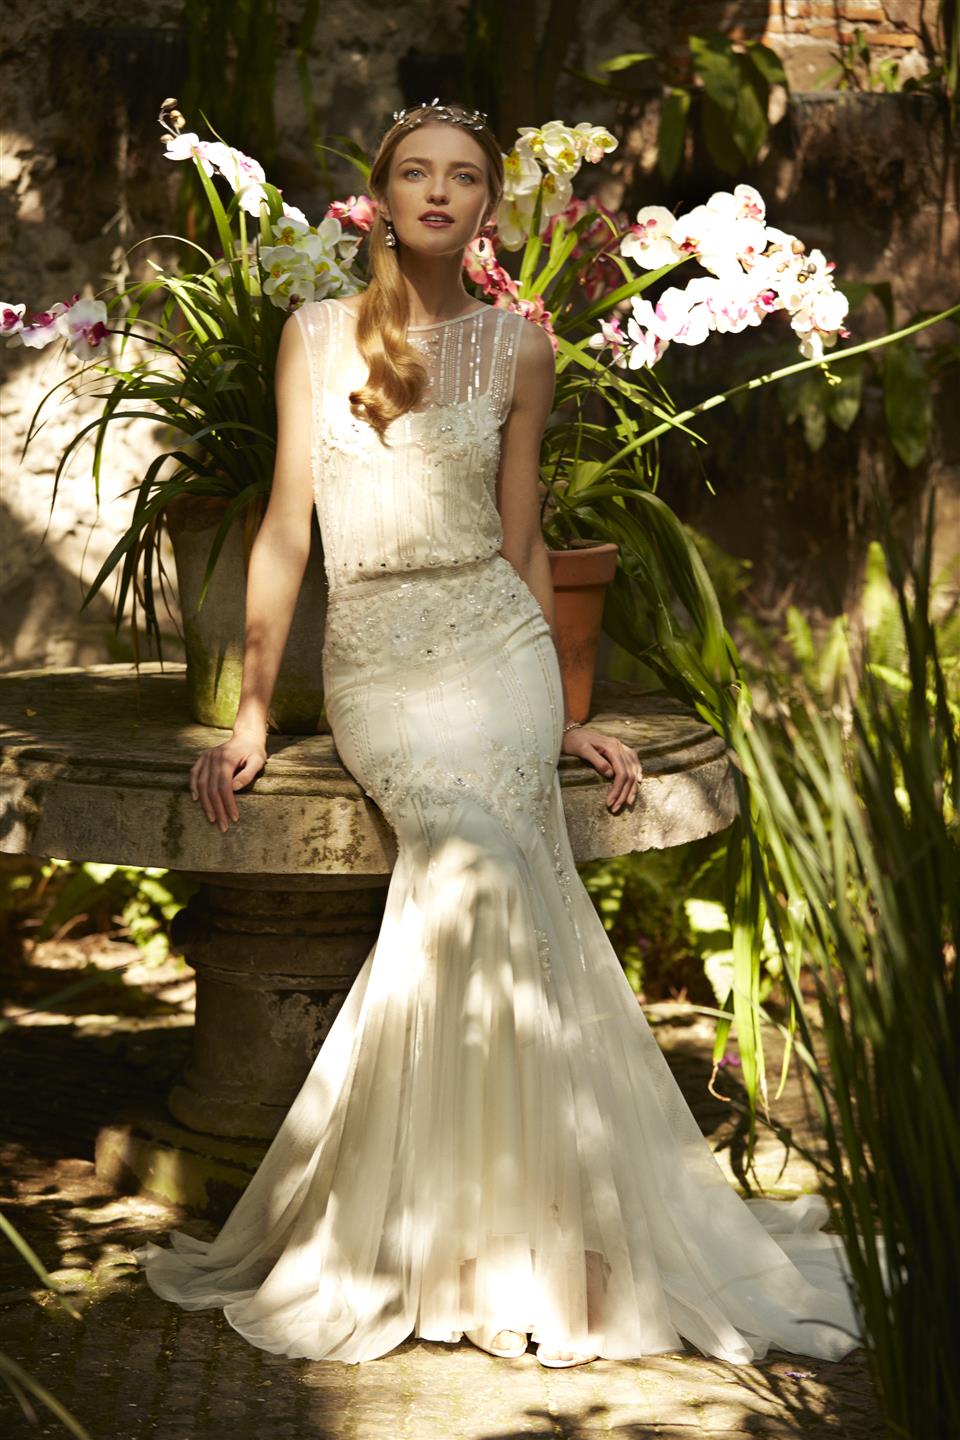 Magnolia Wedding Dress from BHLDN's Spring 2015 Bridal Collection